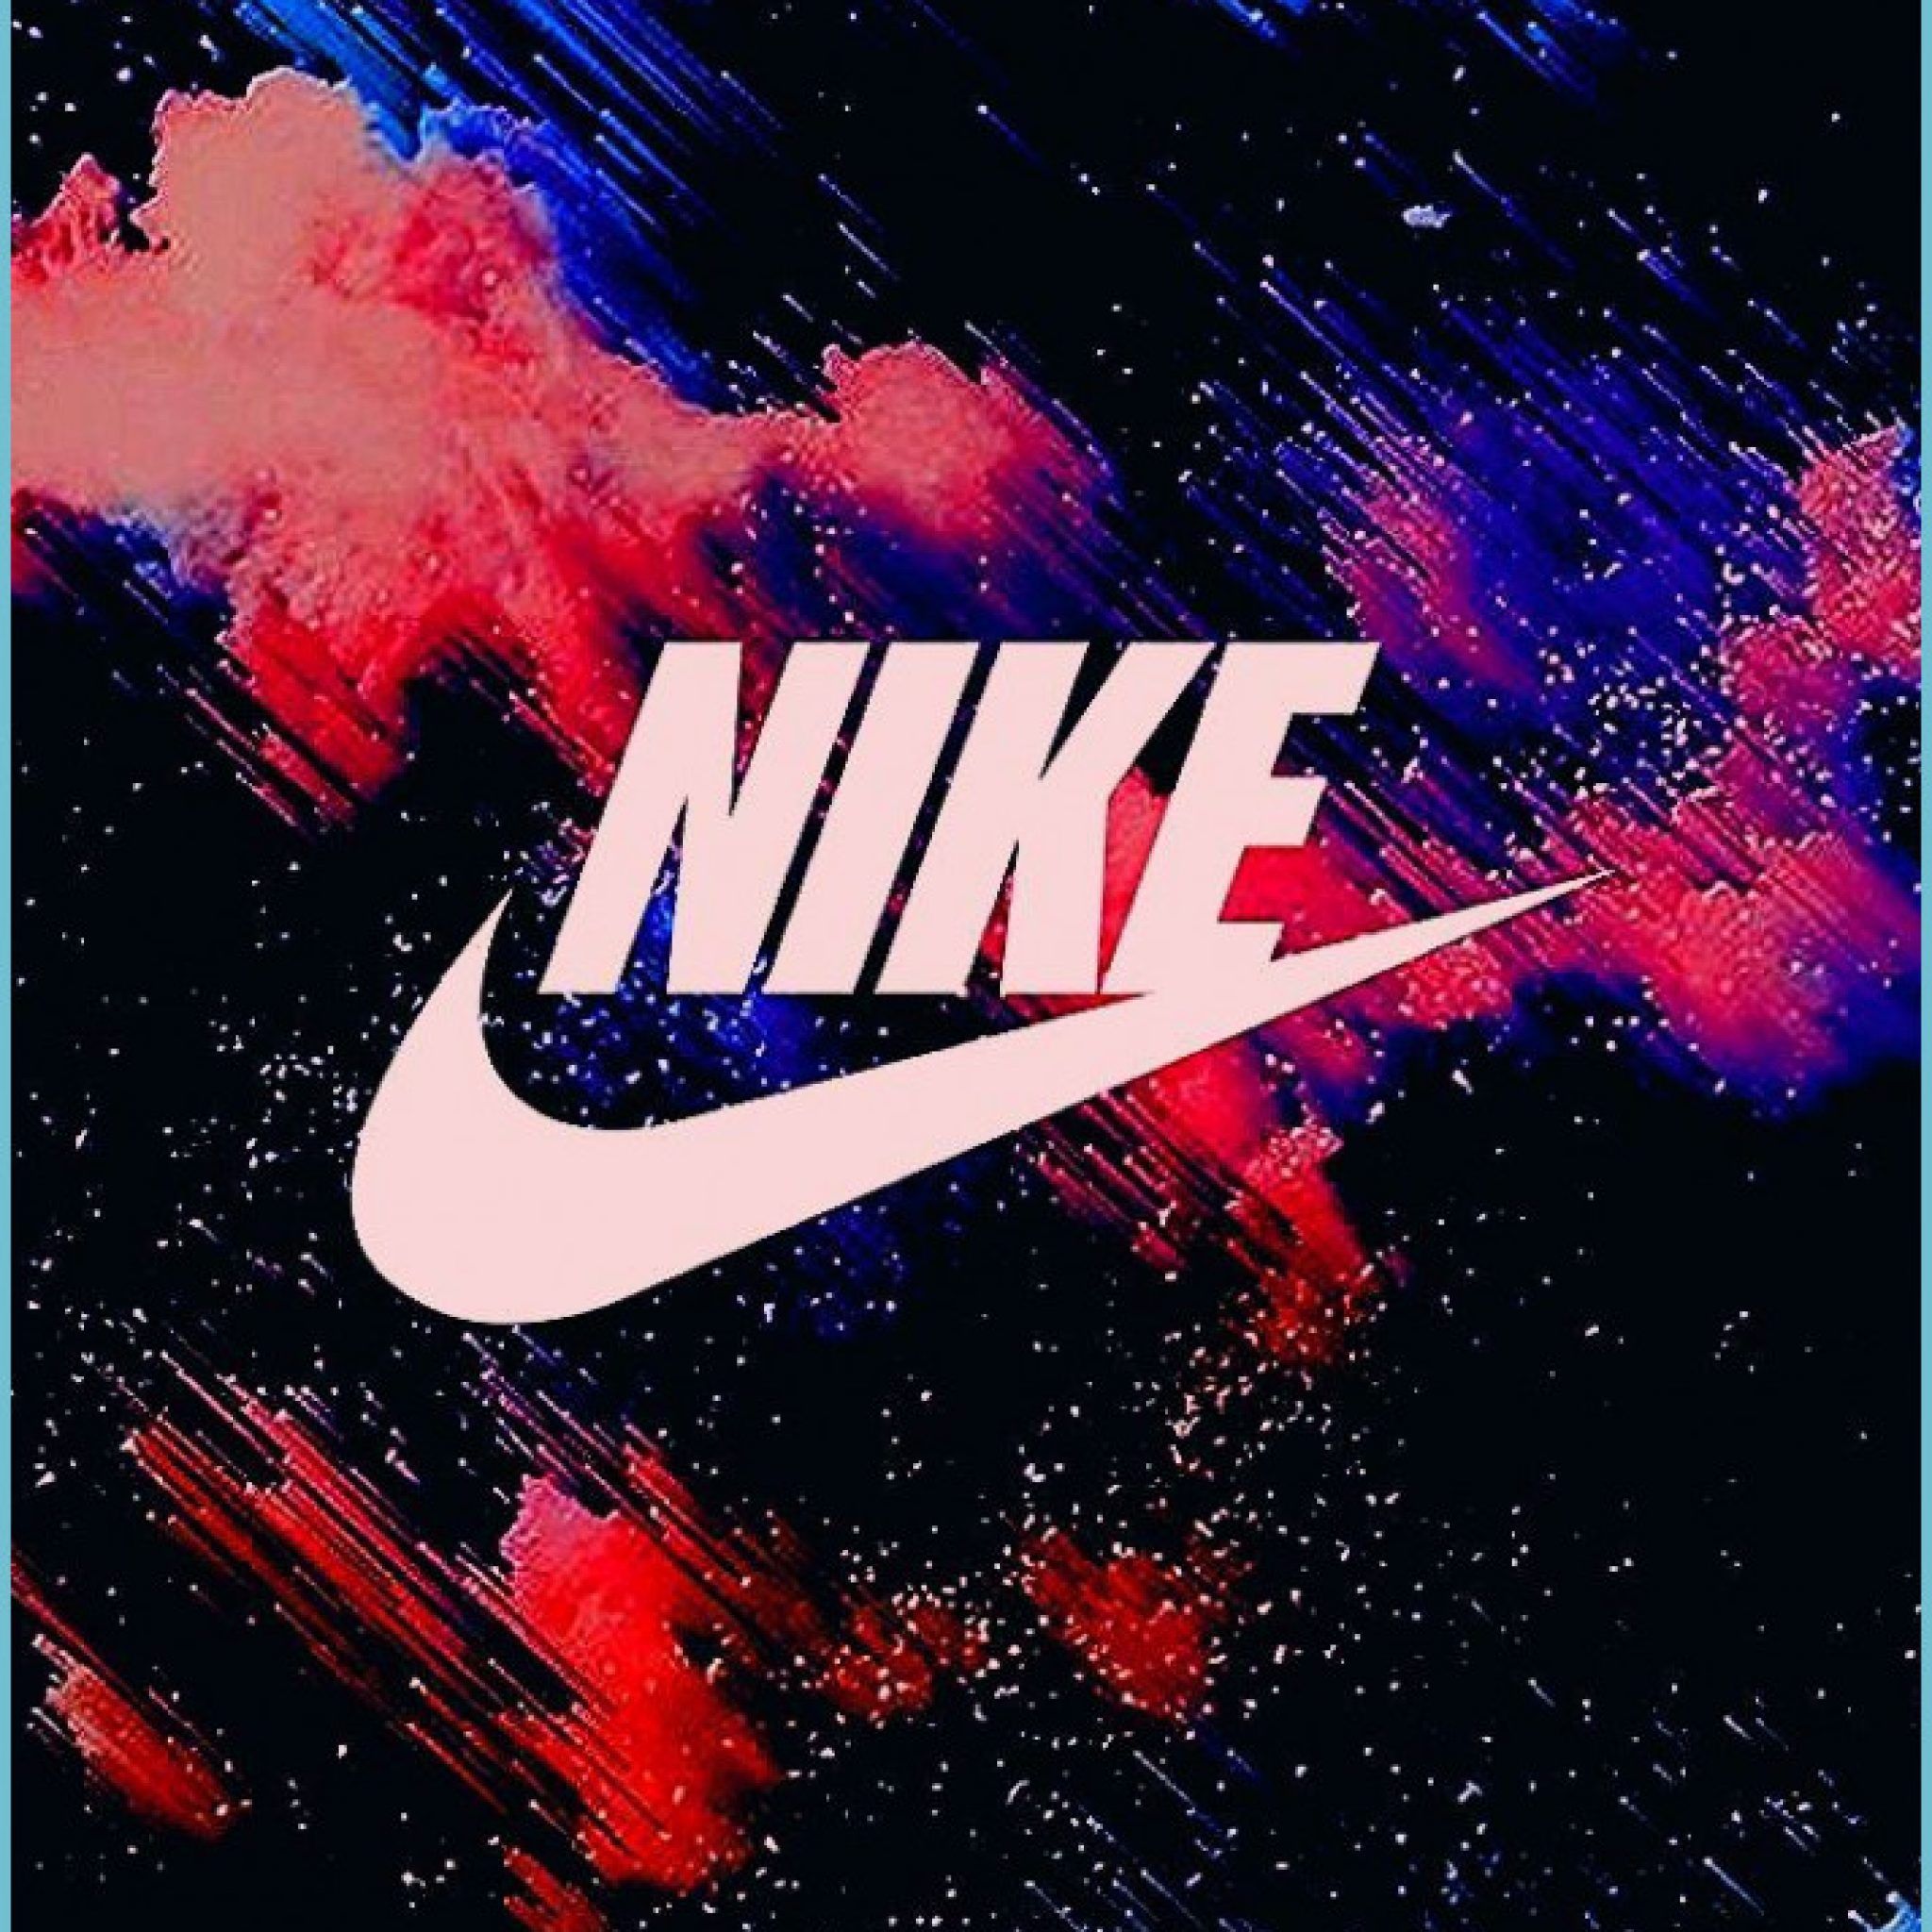 wallpaper #nike #wallpaper #iphone #android #background #hypebeast wallpaper iphone